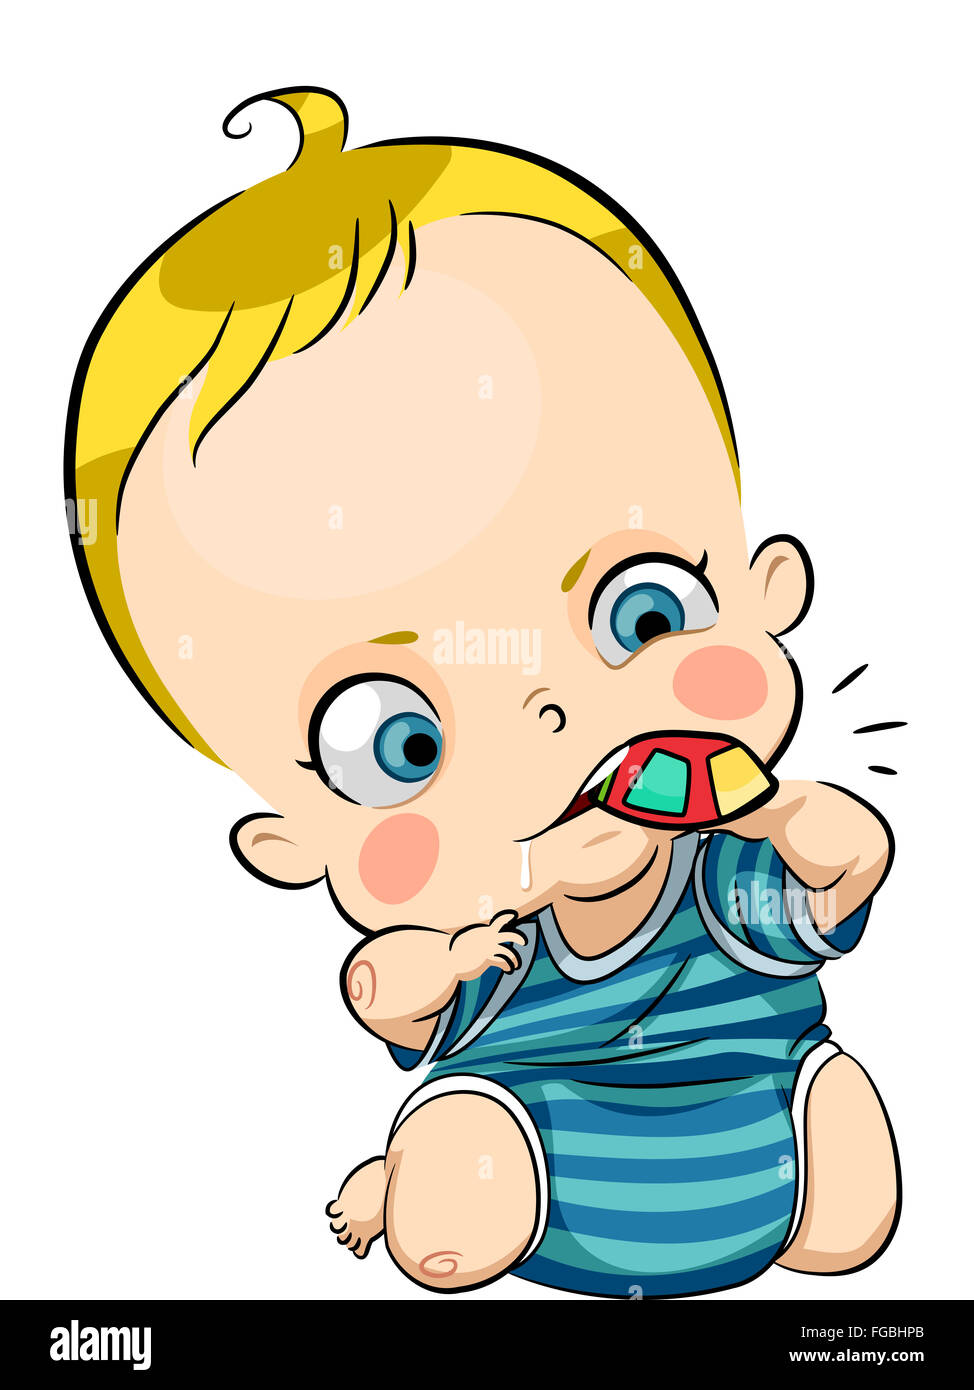 Illustration of a Cute Baby Drooling While Nibbling on a Chew Toy Stock Photo